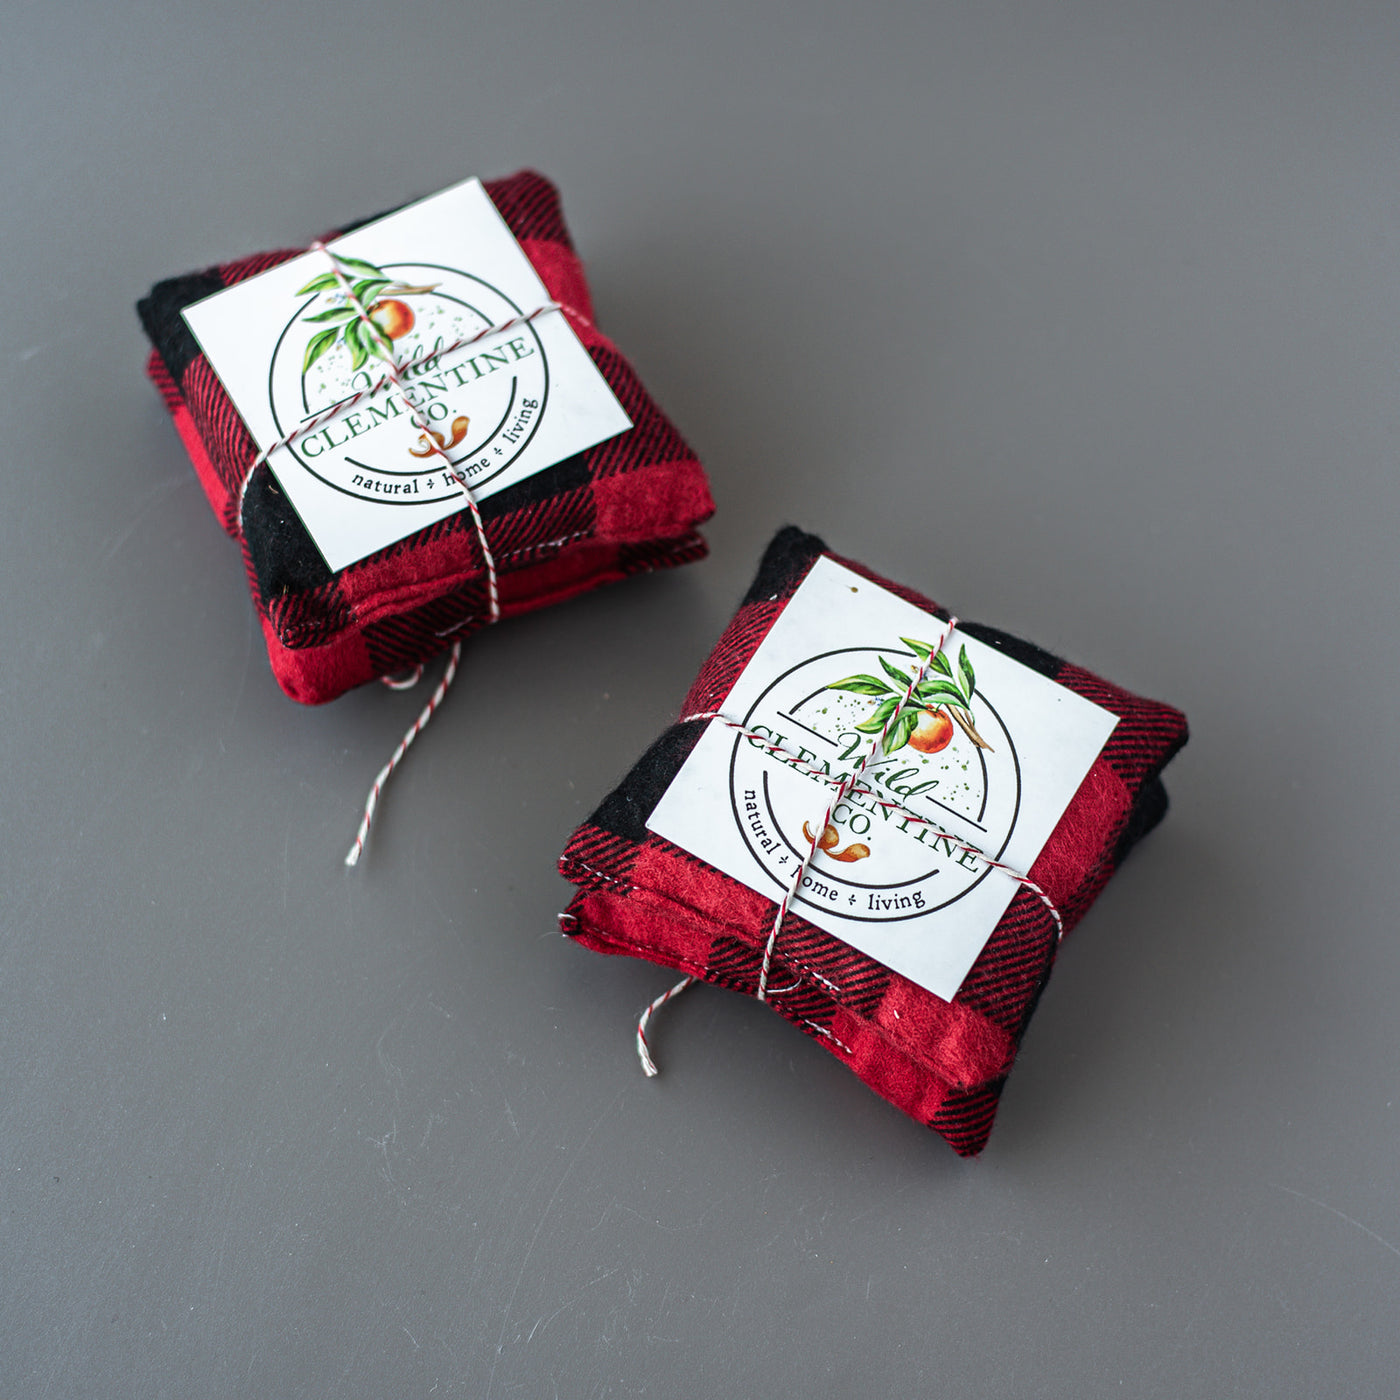 Hand Warmers (set of 2)- Wild Clementine Co.